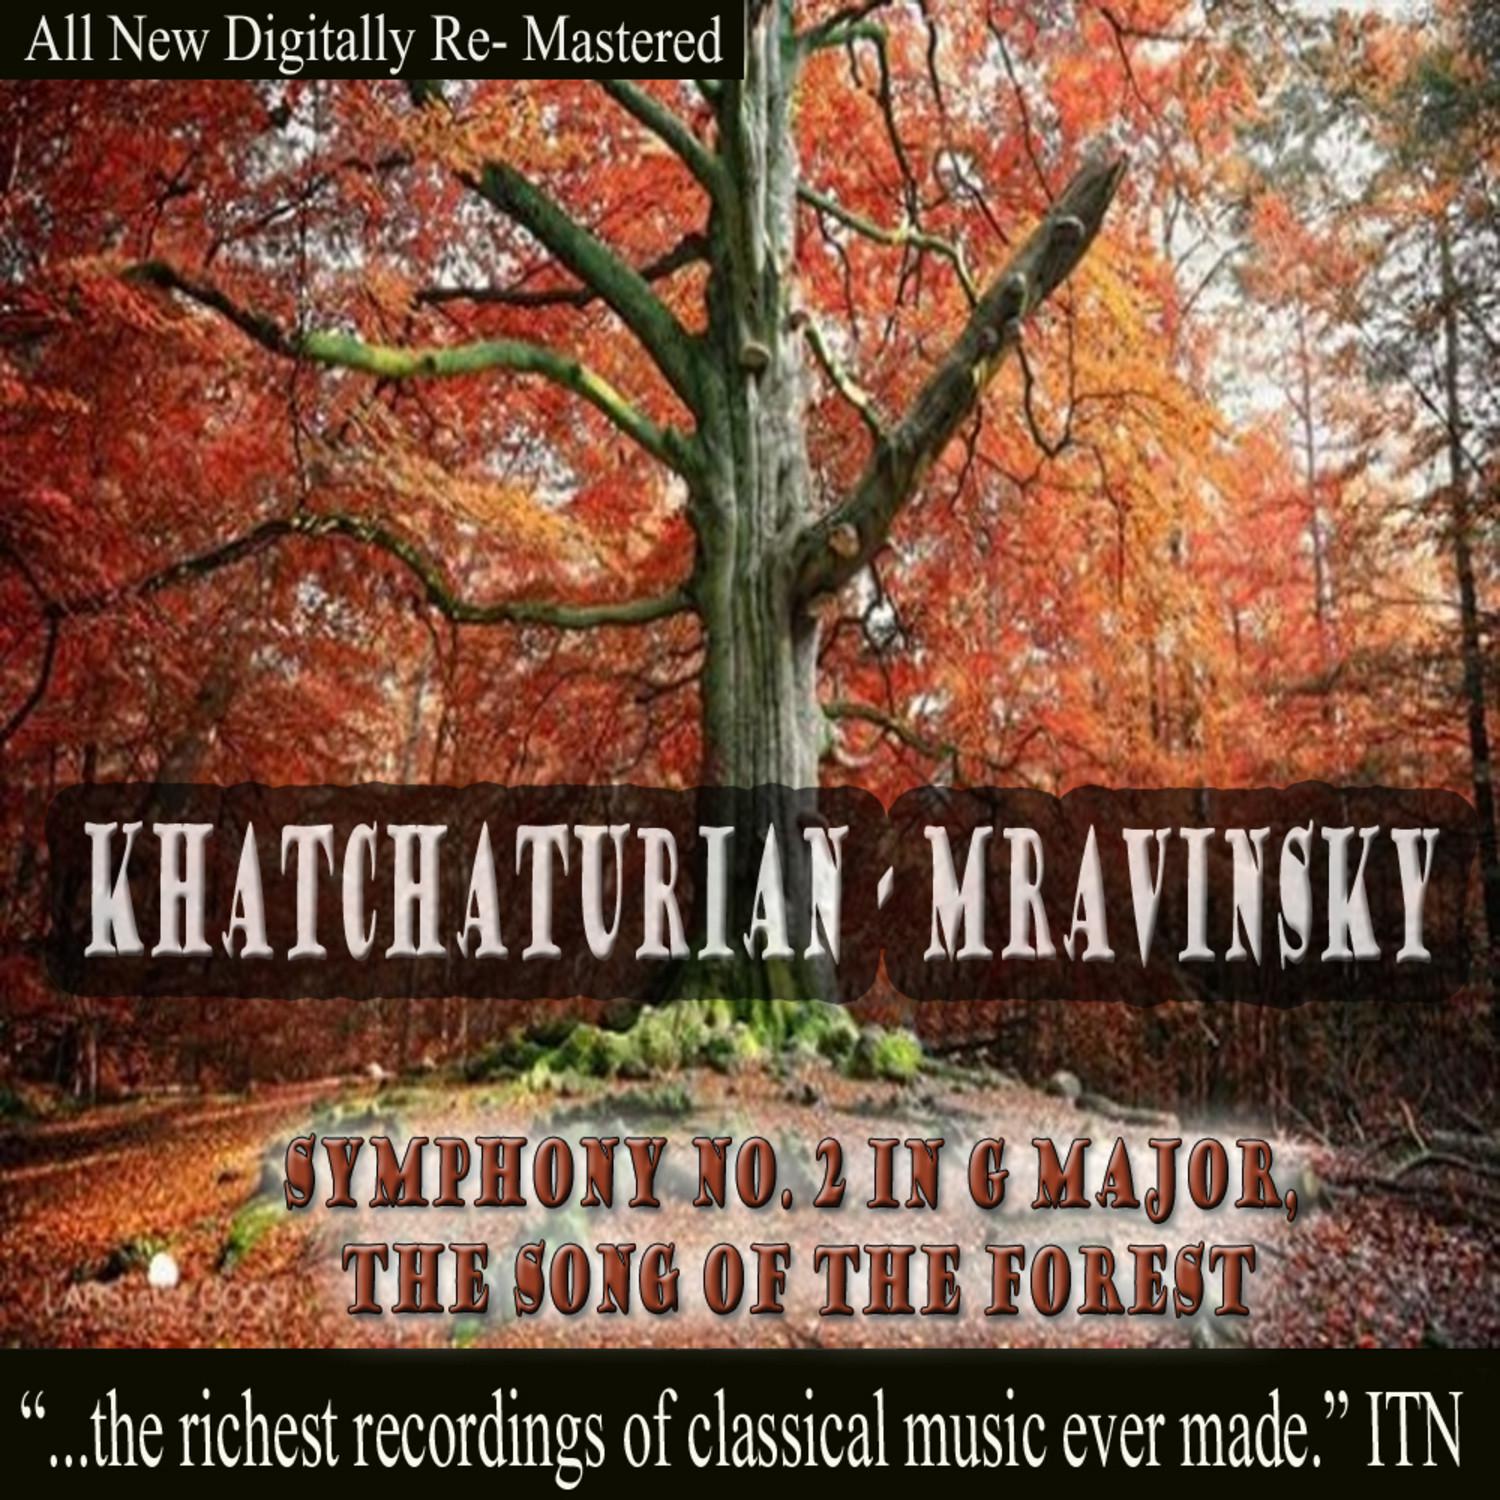 Mravinsky - Khatchaturian, The Song of the Forest